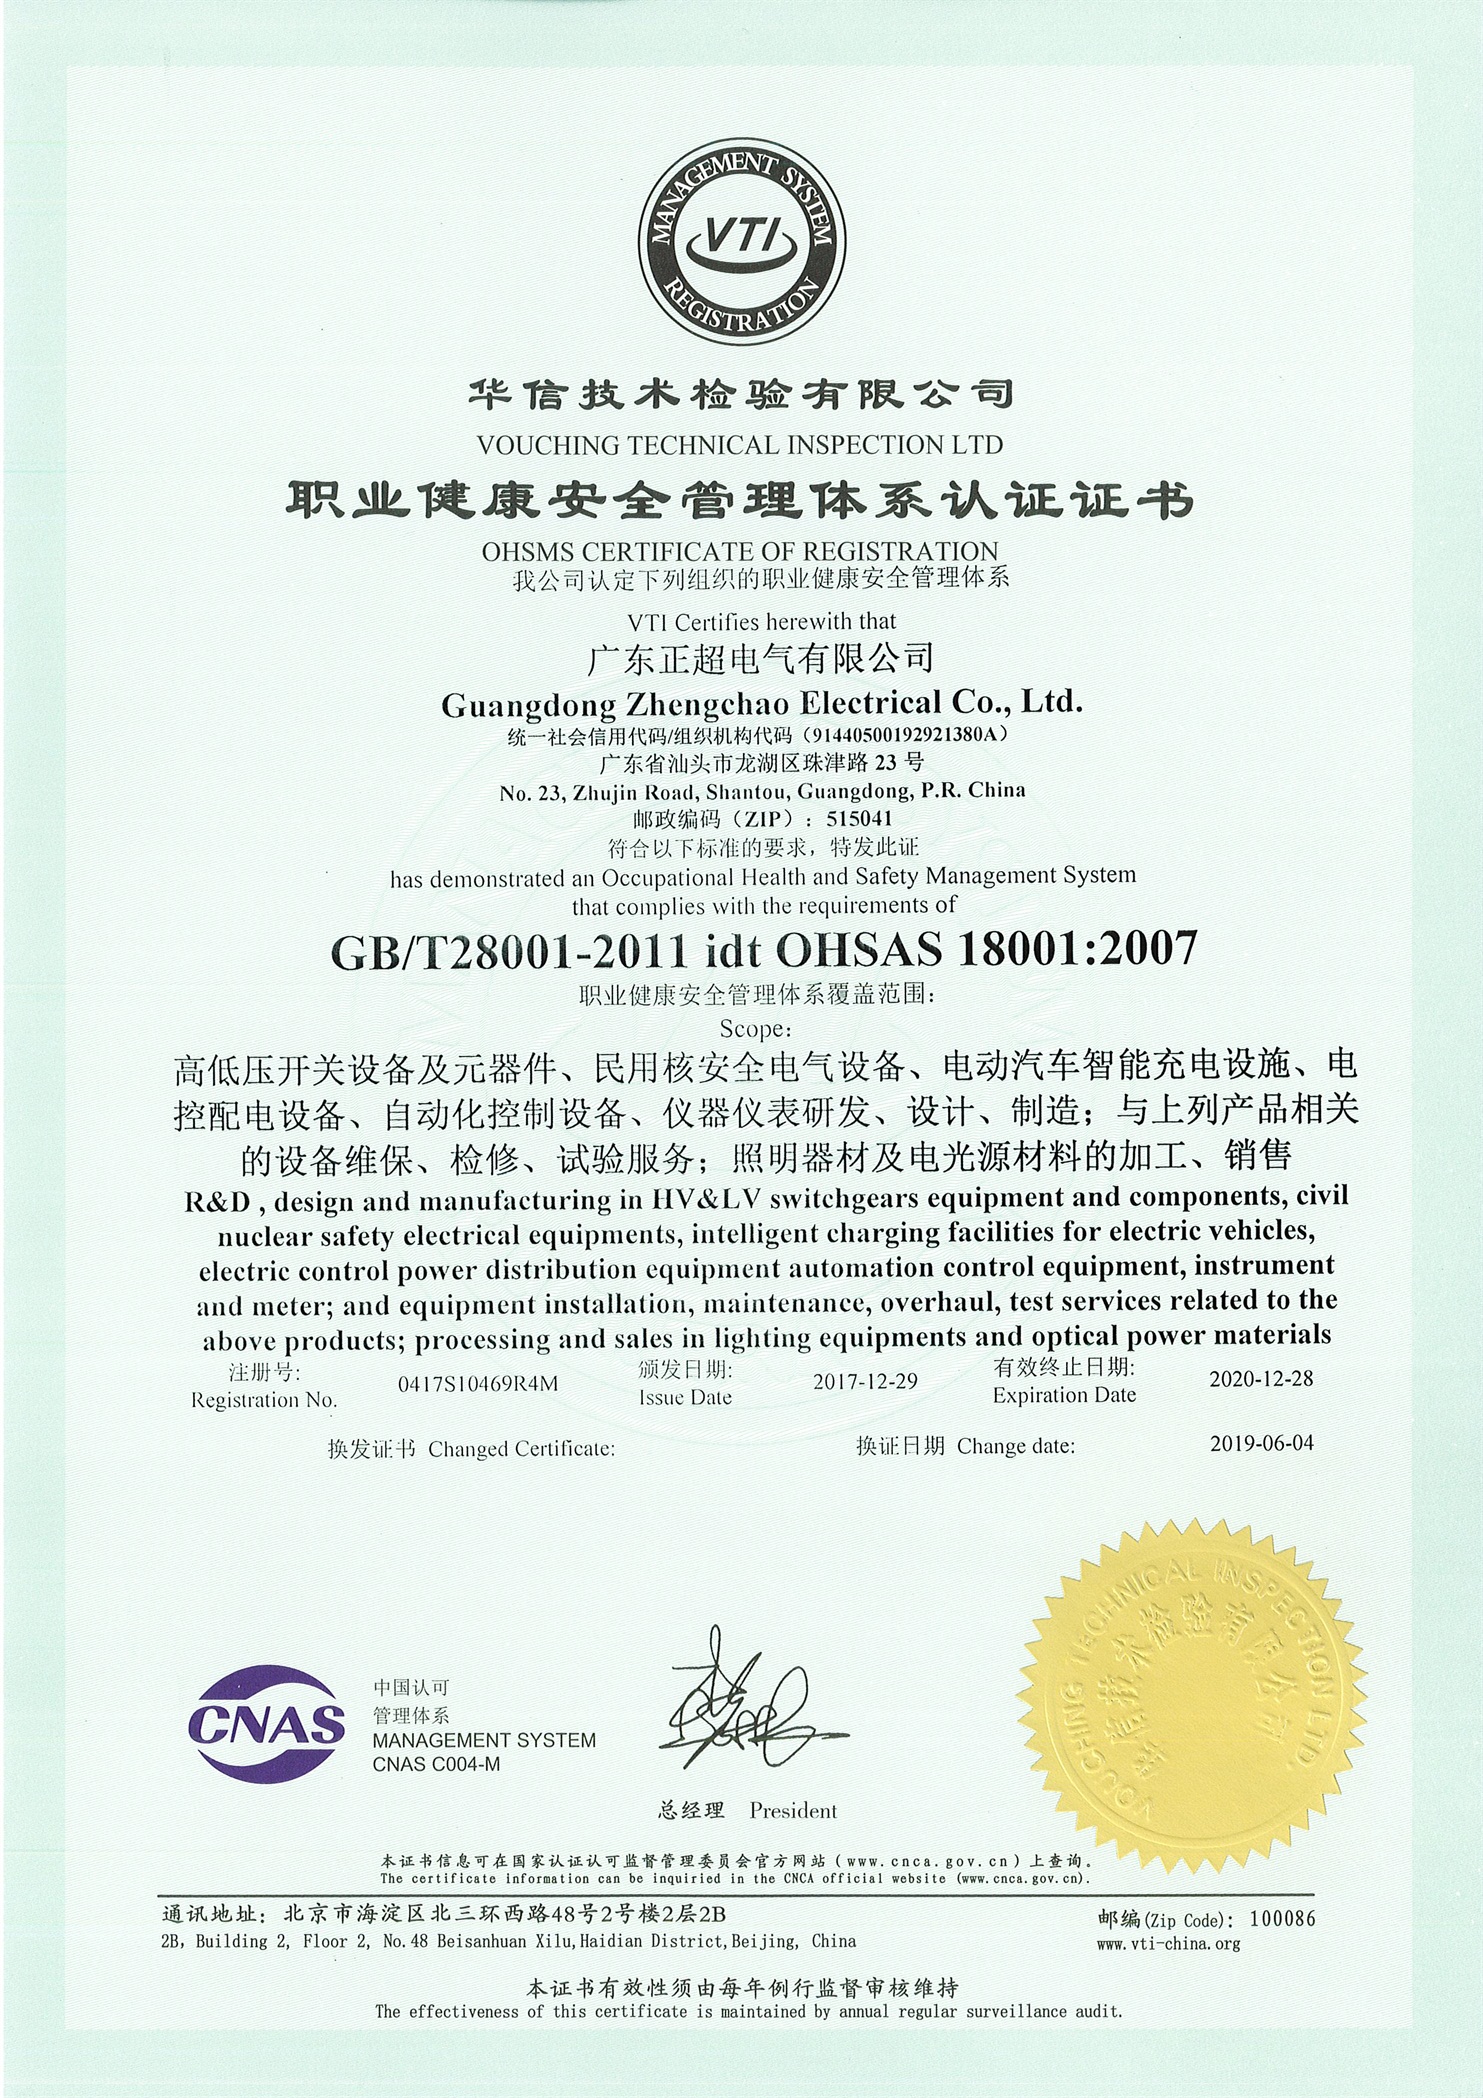 OHSMS Certificate of registration